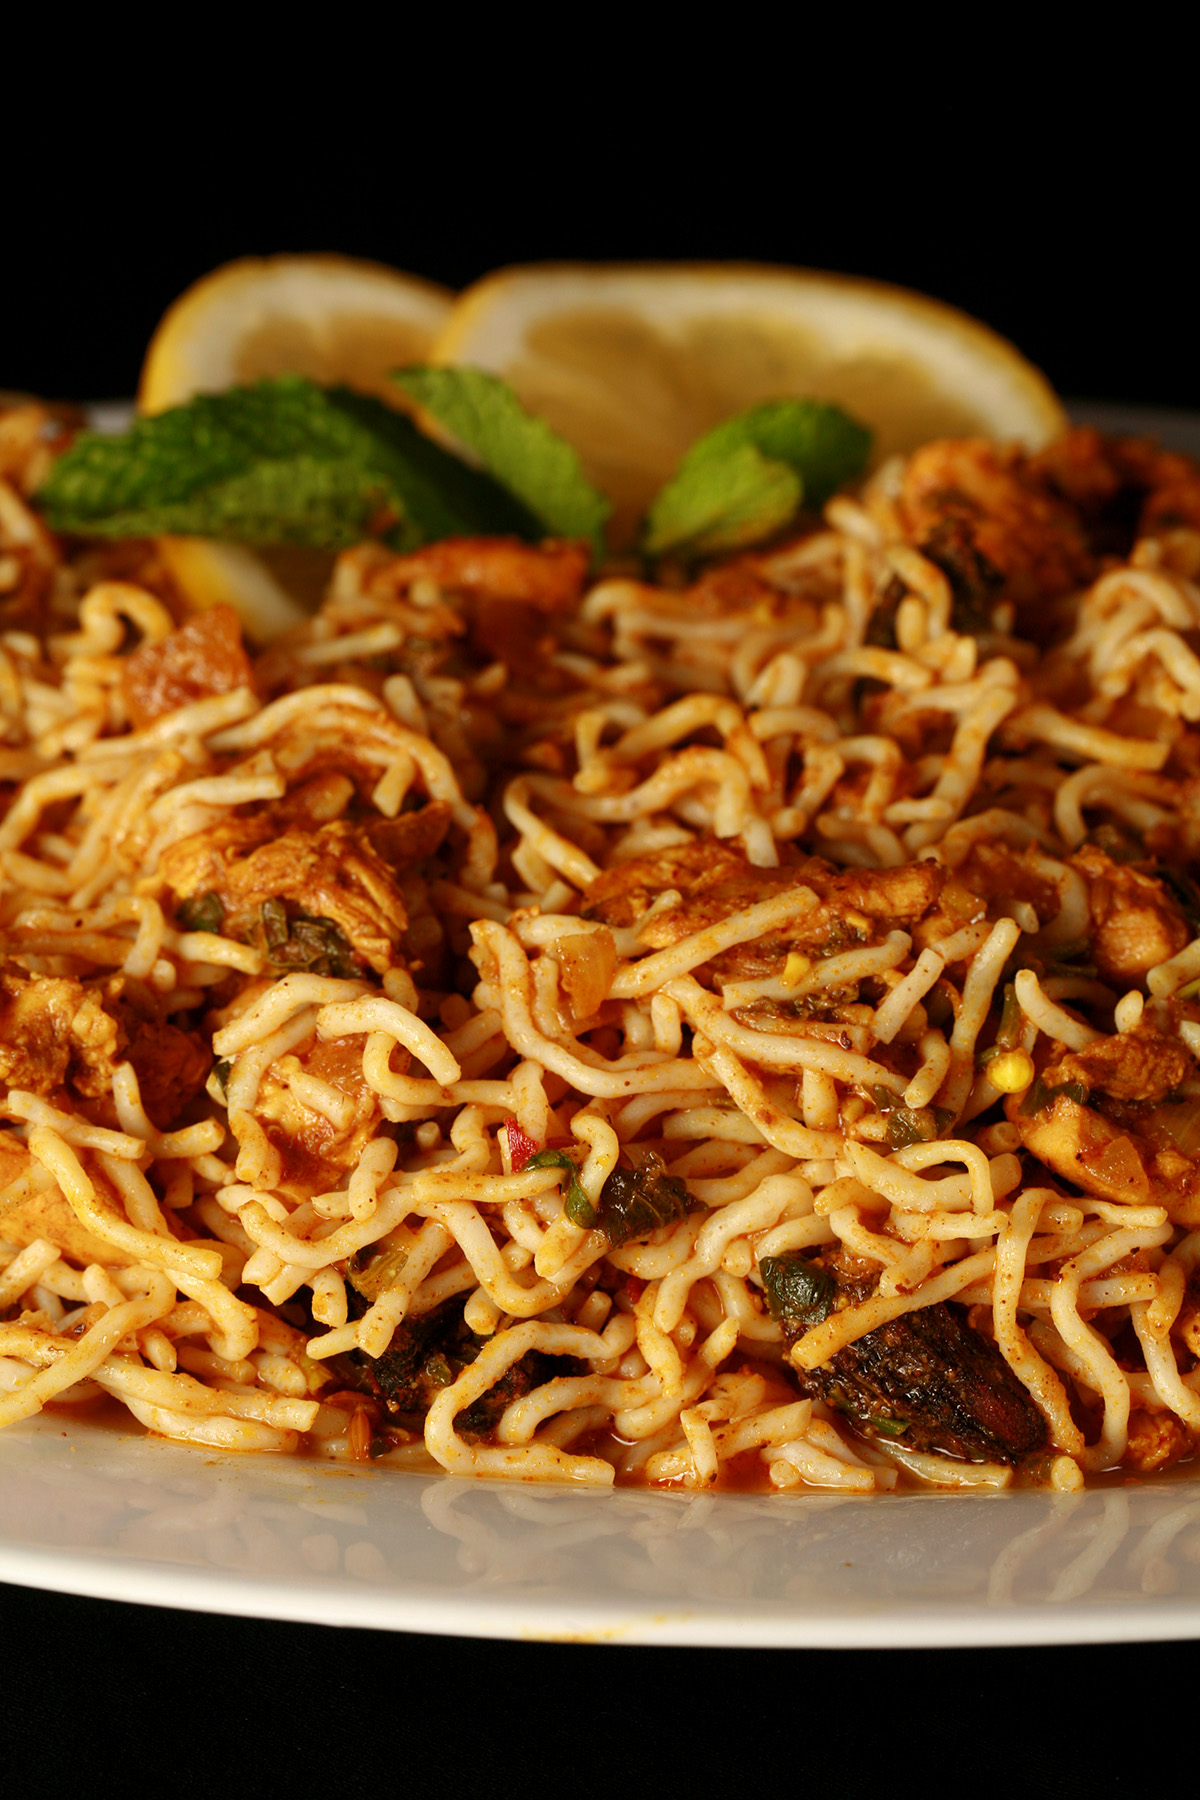 A large oval plate of low carb chicken biryani, using konjac noodles.